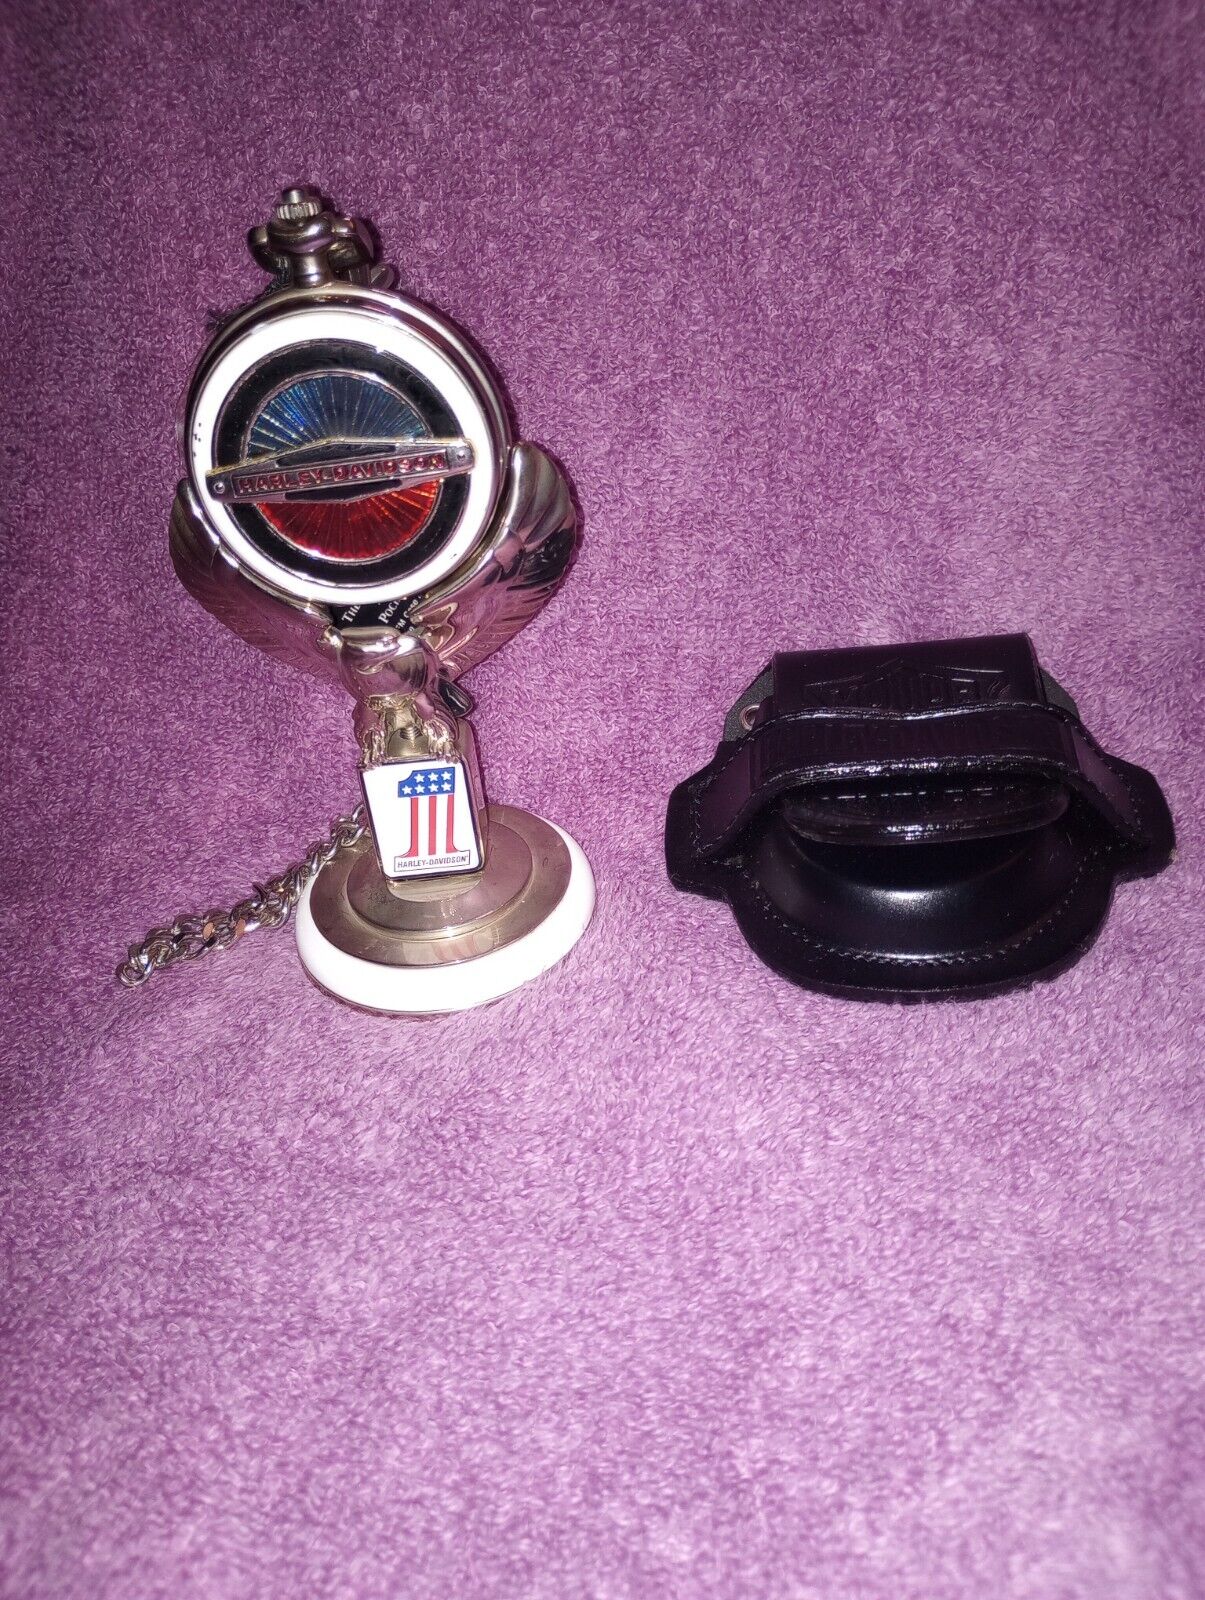 Franklin Mint Super Glide Harley Davidson Pocket Watch With Stand And Case